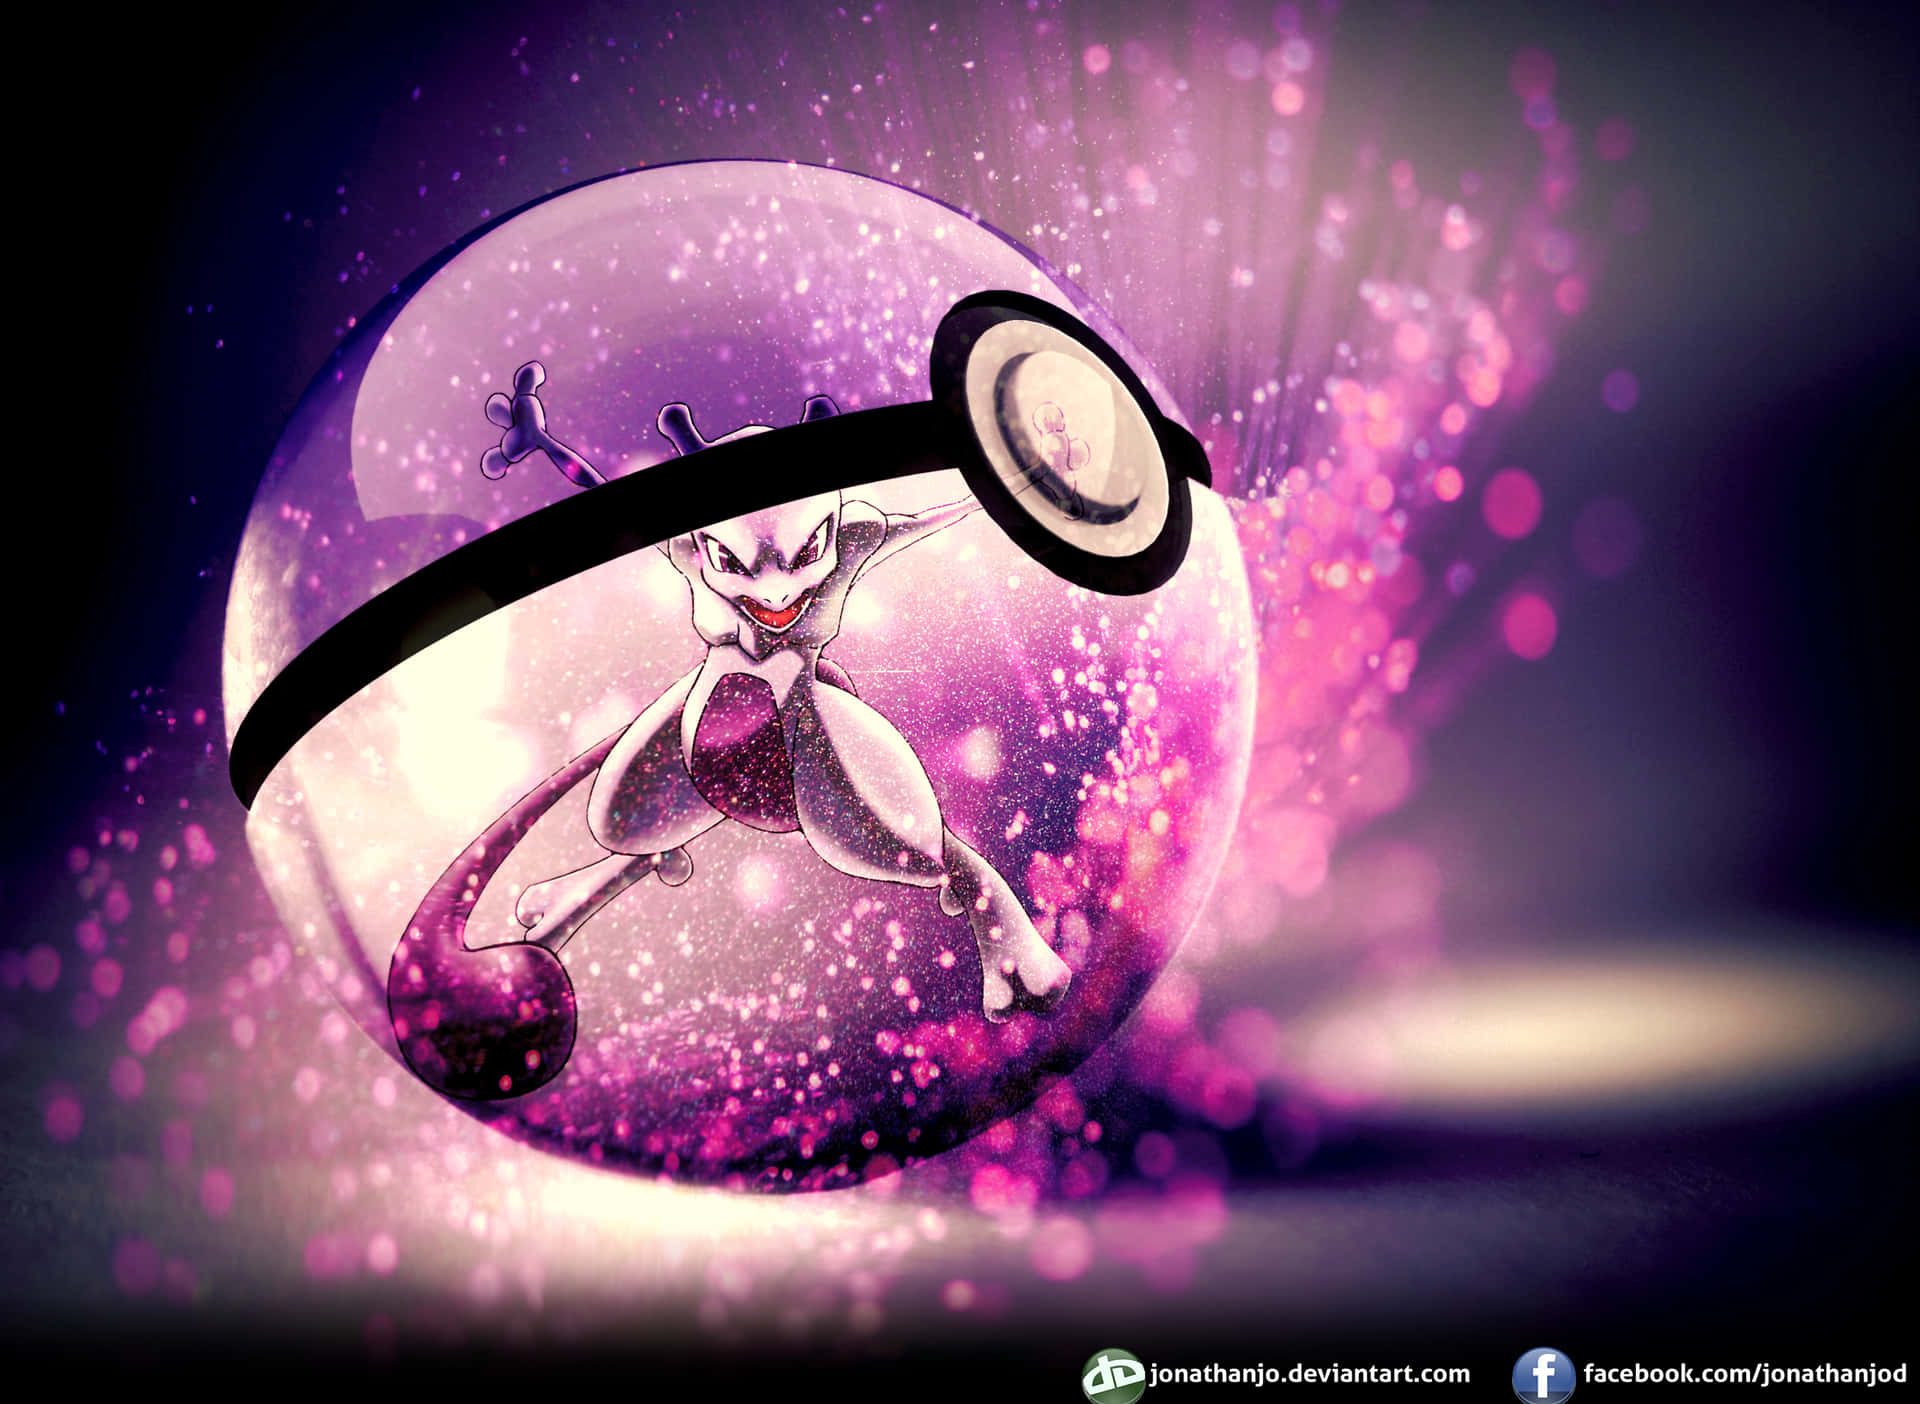 "Catch a Glimpse of the Mythical Pokémon Mew!" Wallpaper